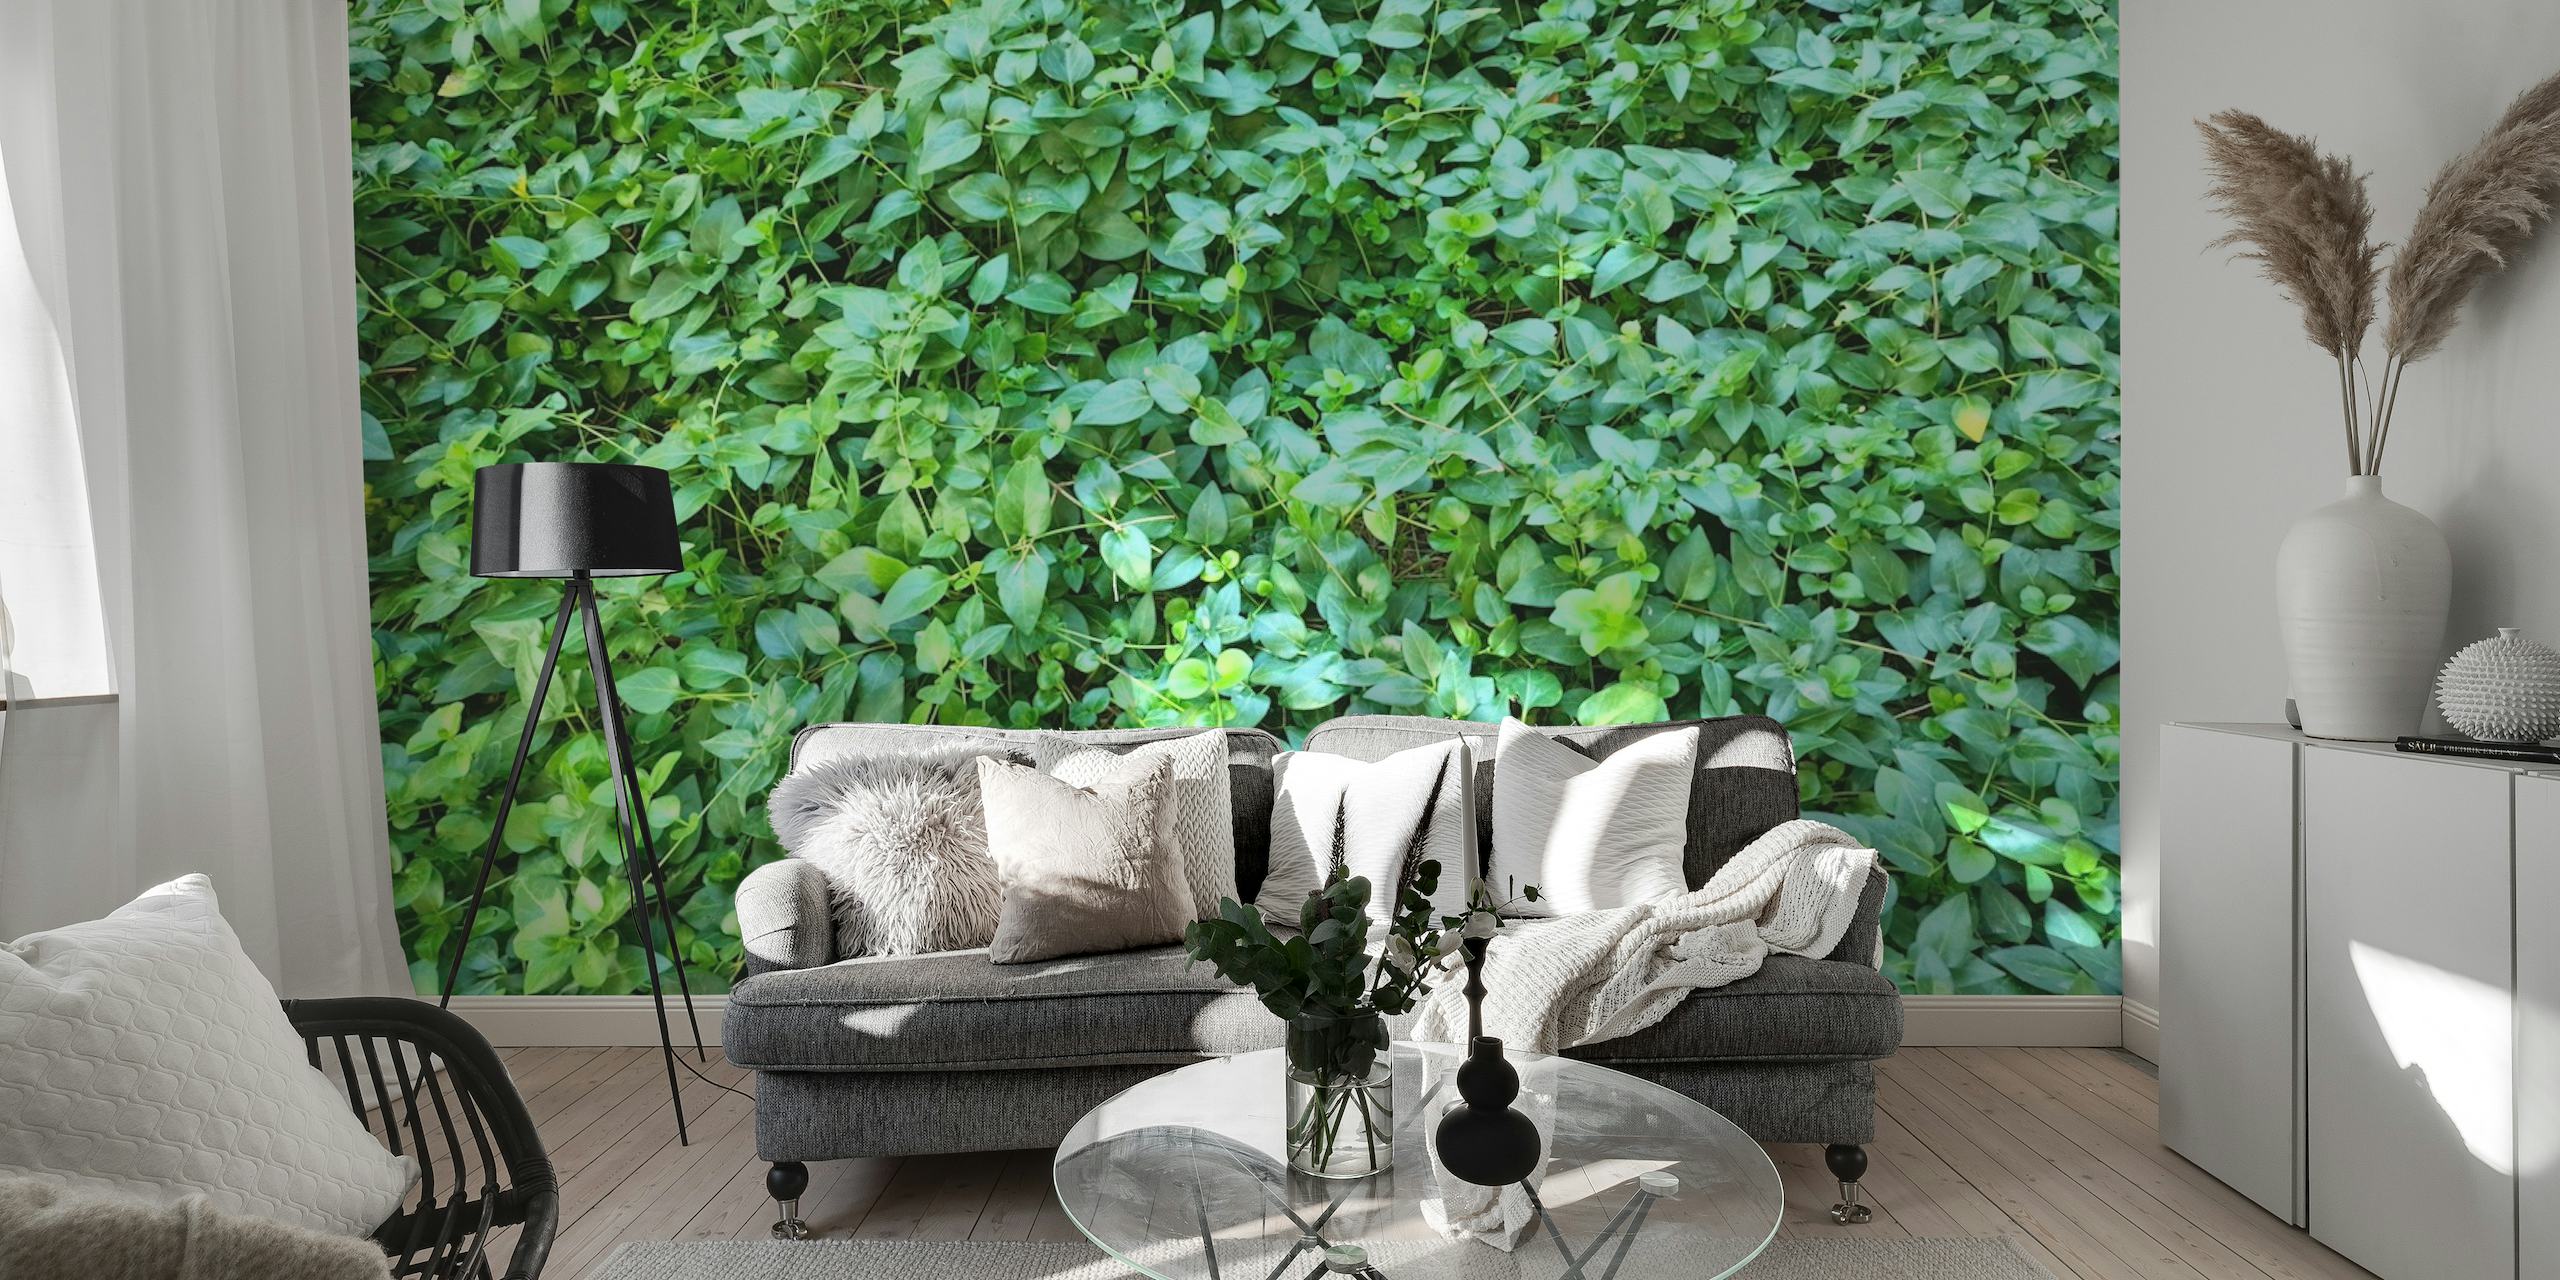 Lush greenery wall mural of dense foliage for relaxing interior decor